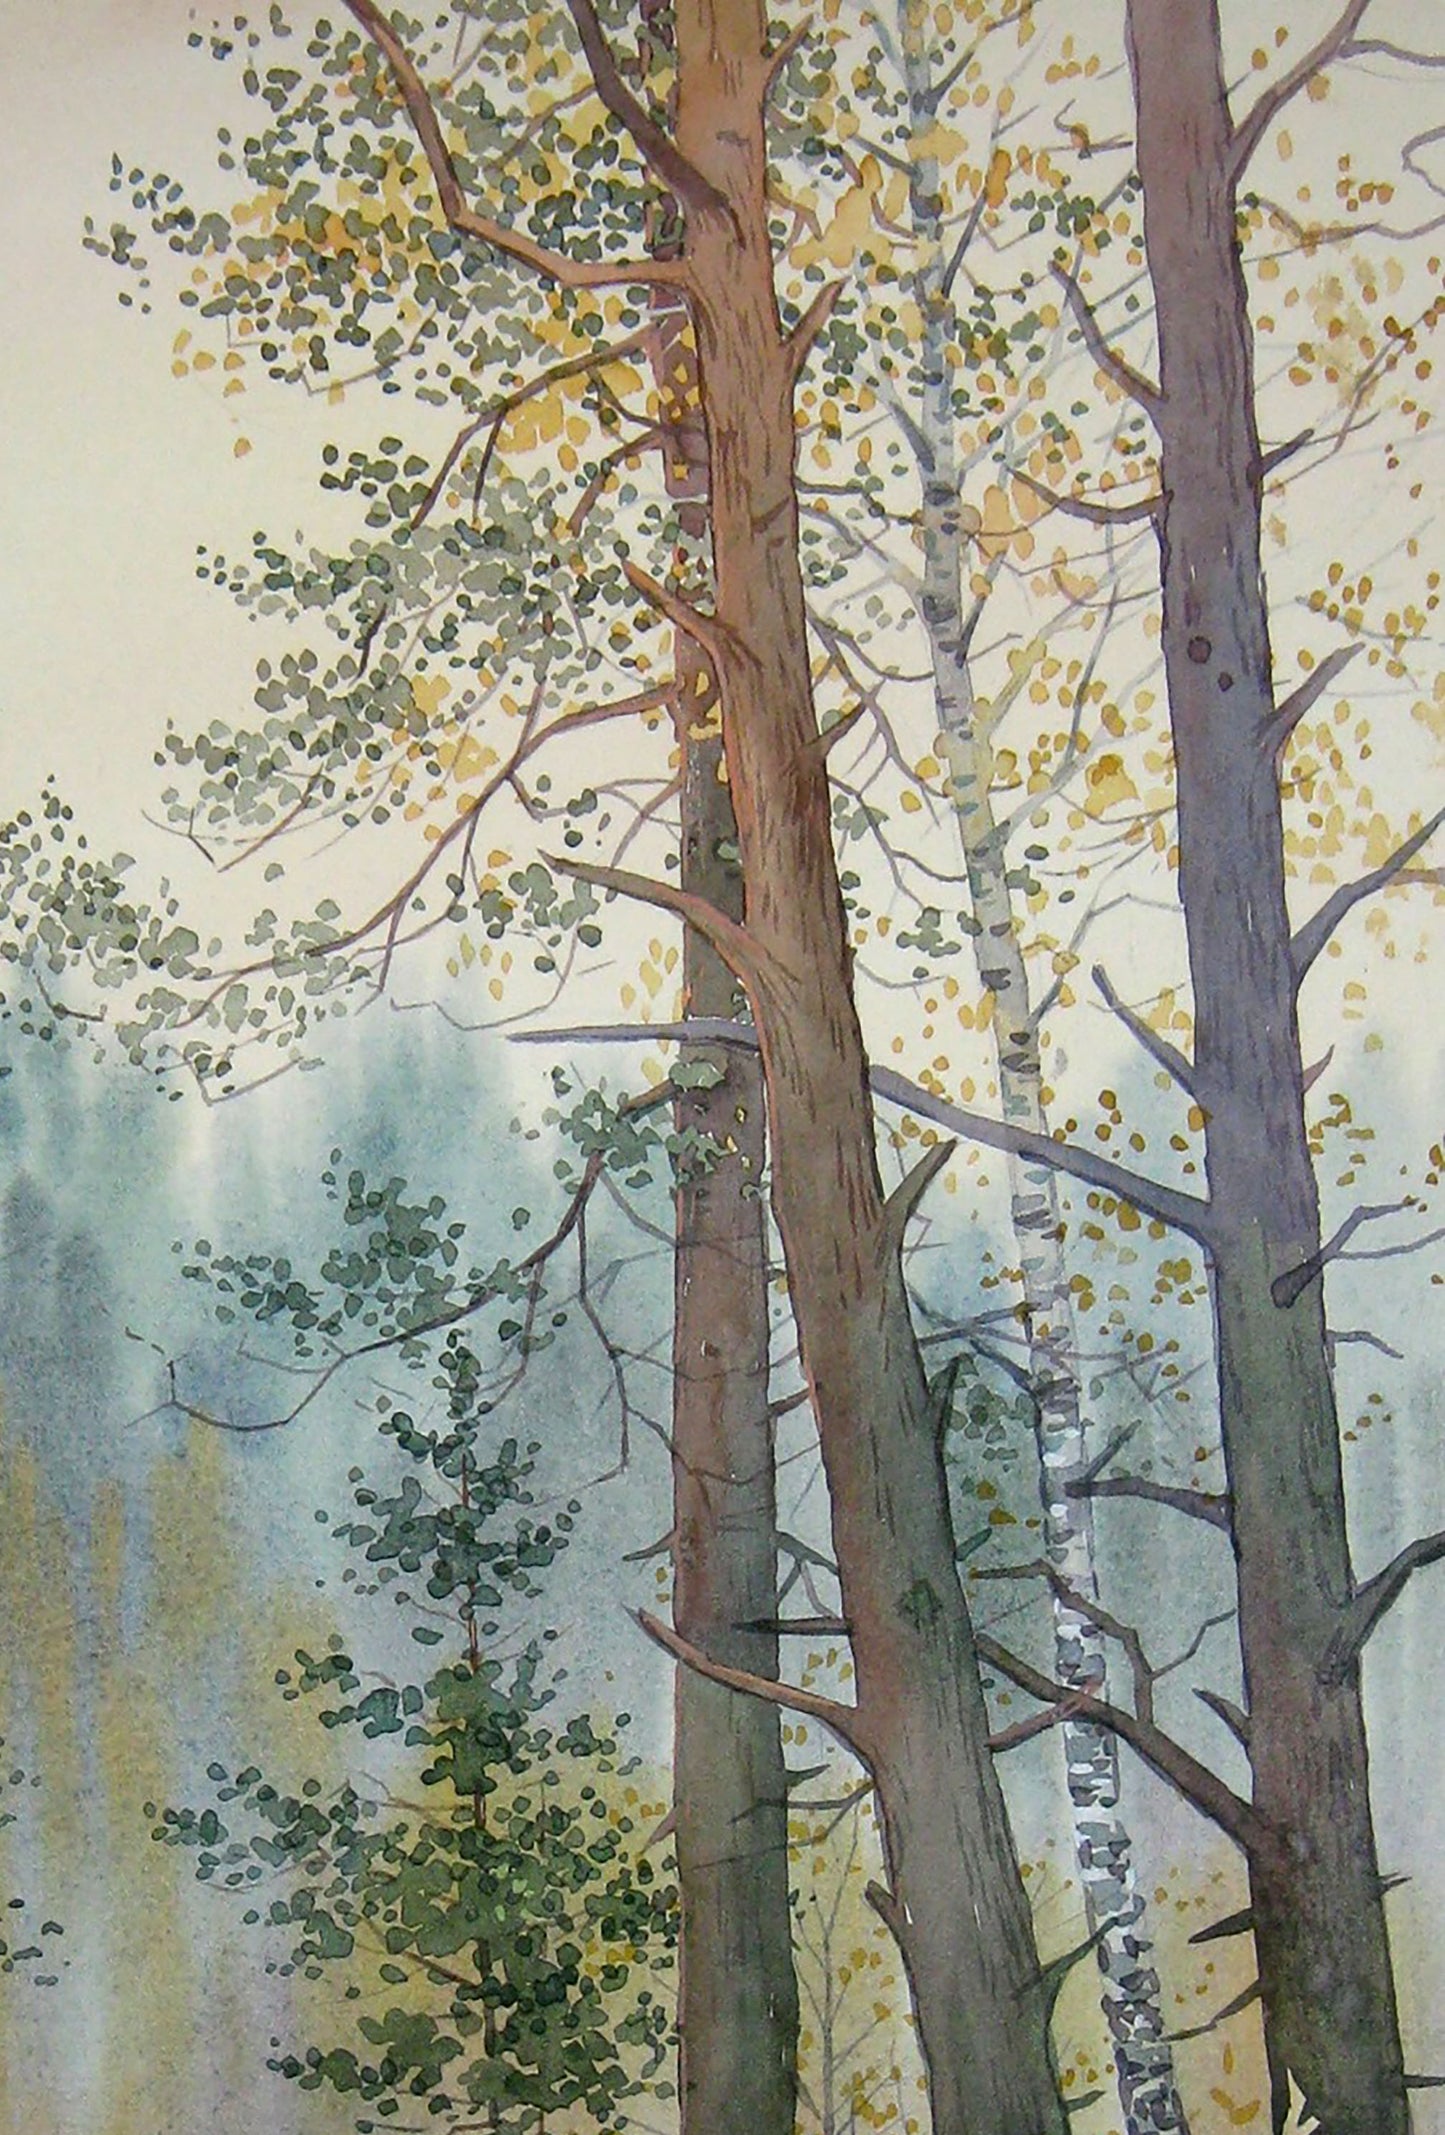 Watercolor painting Autumn golden forest Savenets Valery